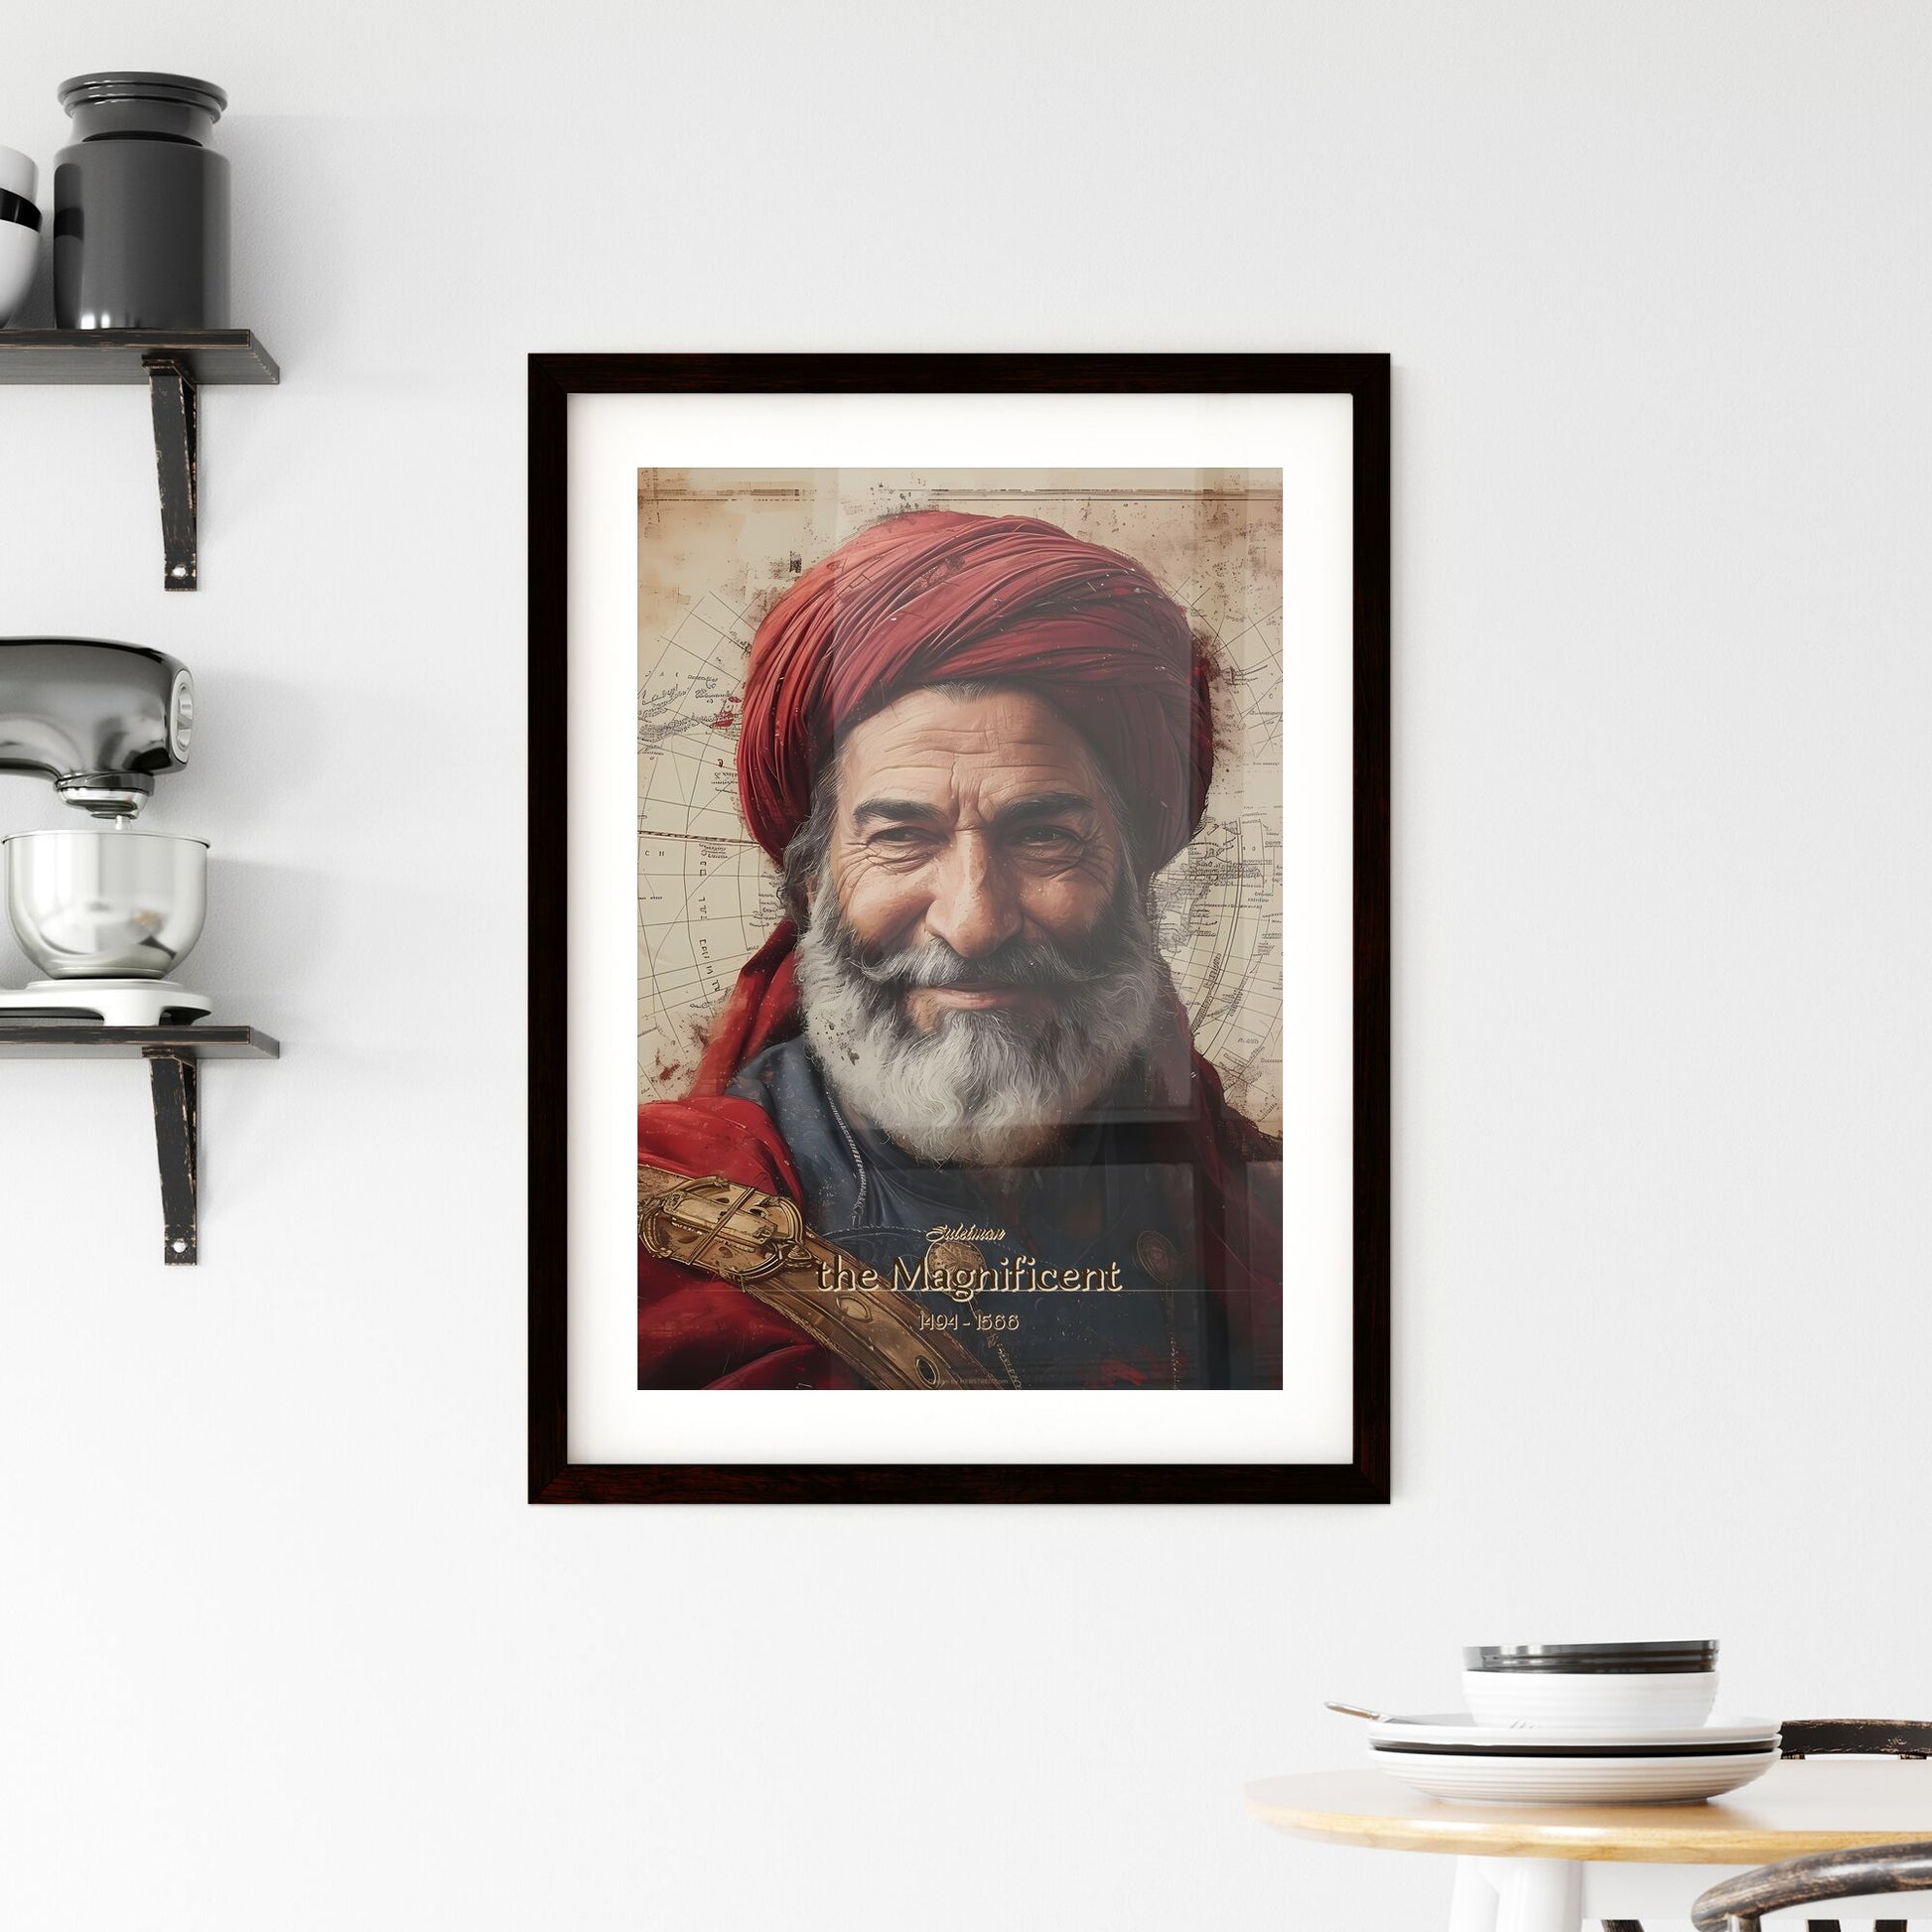 Suleiman, the Magnificent, 1494 - 1566, A Poster of a man wearing a red turban and a belt Default Title